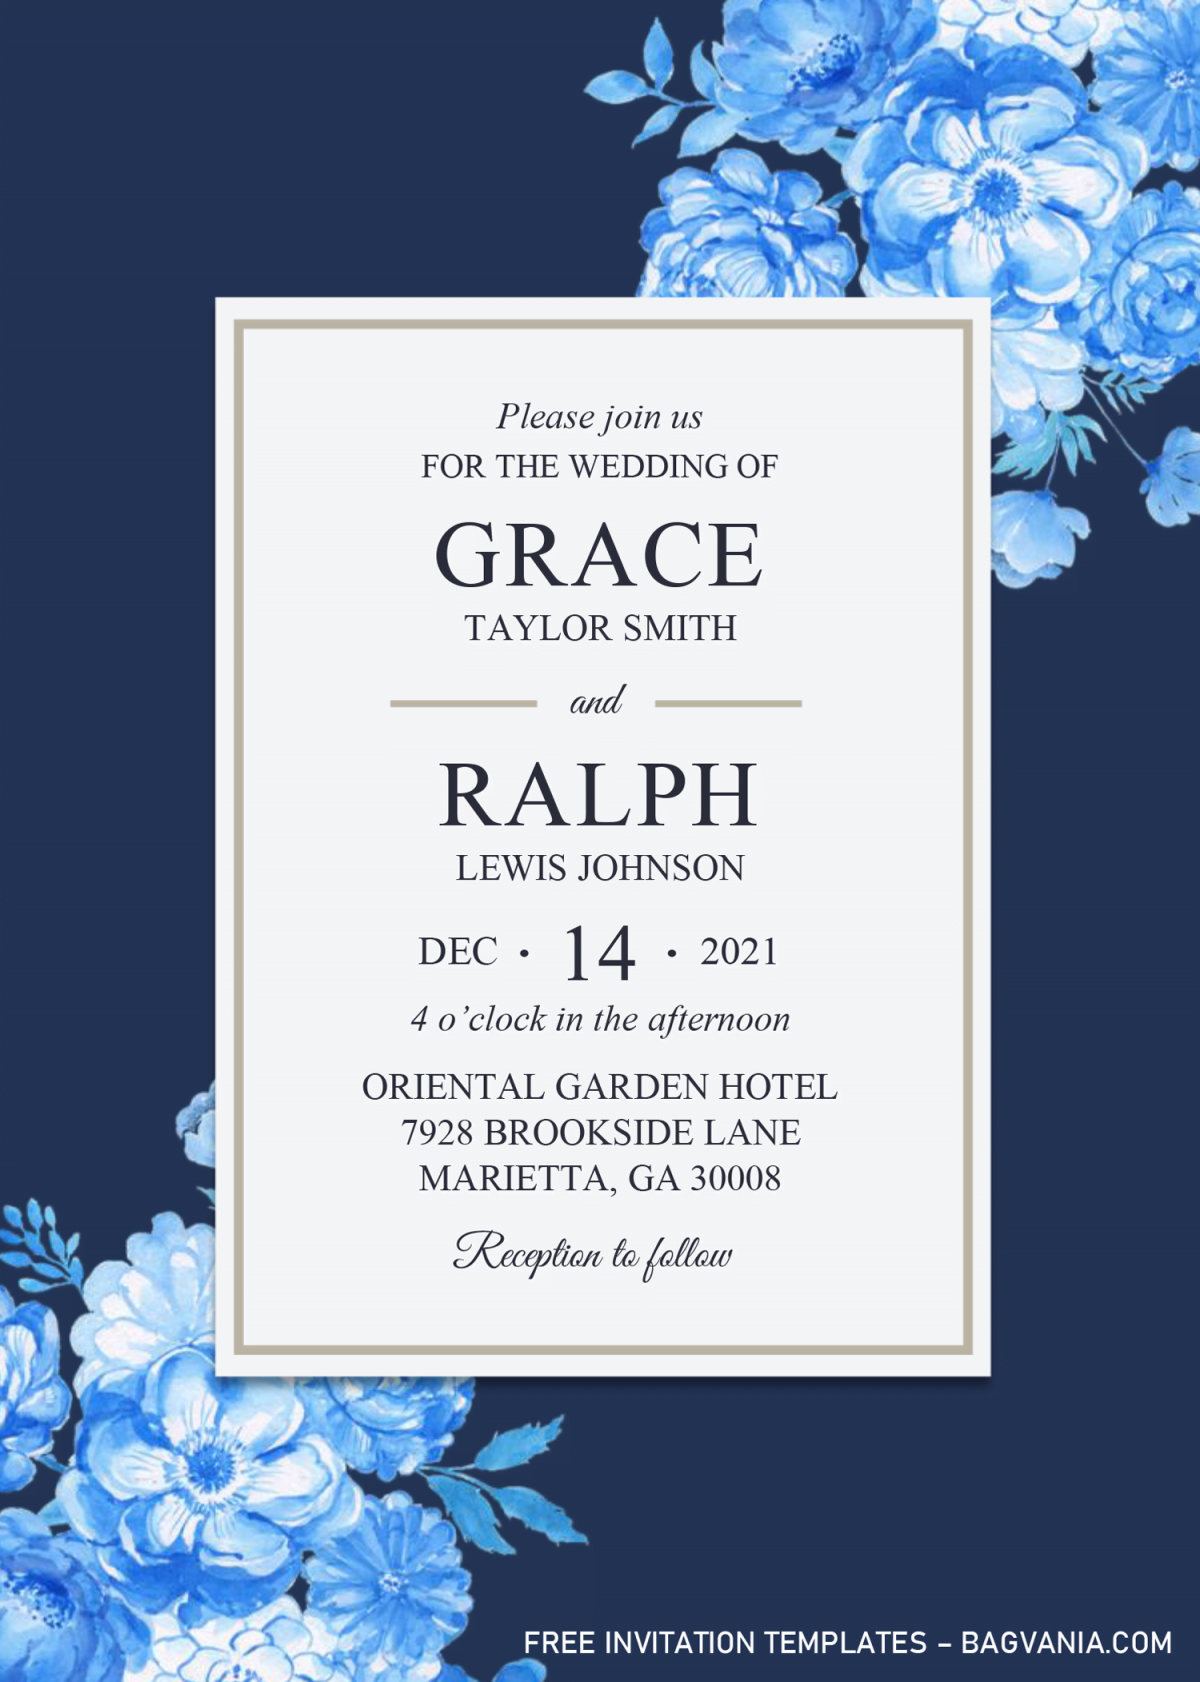 Modern Navy Invitation Templates - Editable With Microsoft Word and has blue peonies